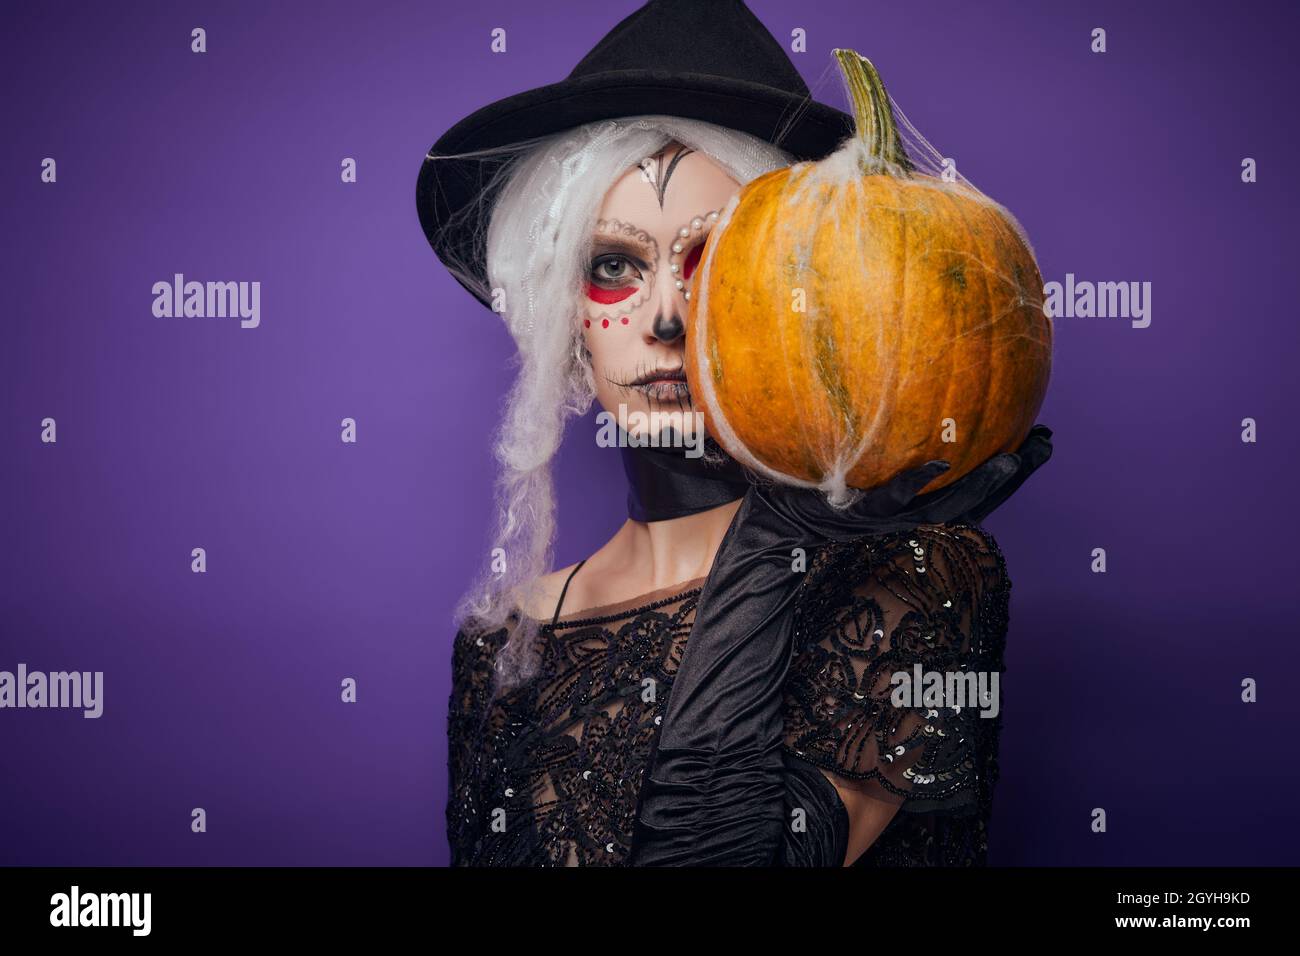 Serious young woman with Halloween make-up covers half of face with pumpkin Stock Photo